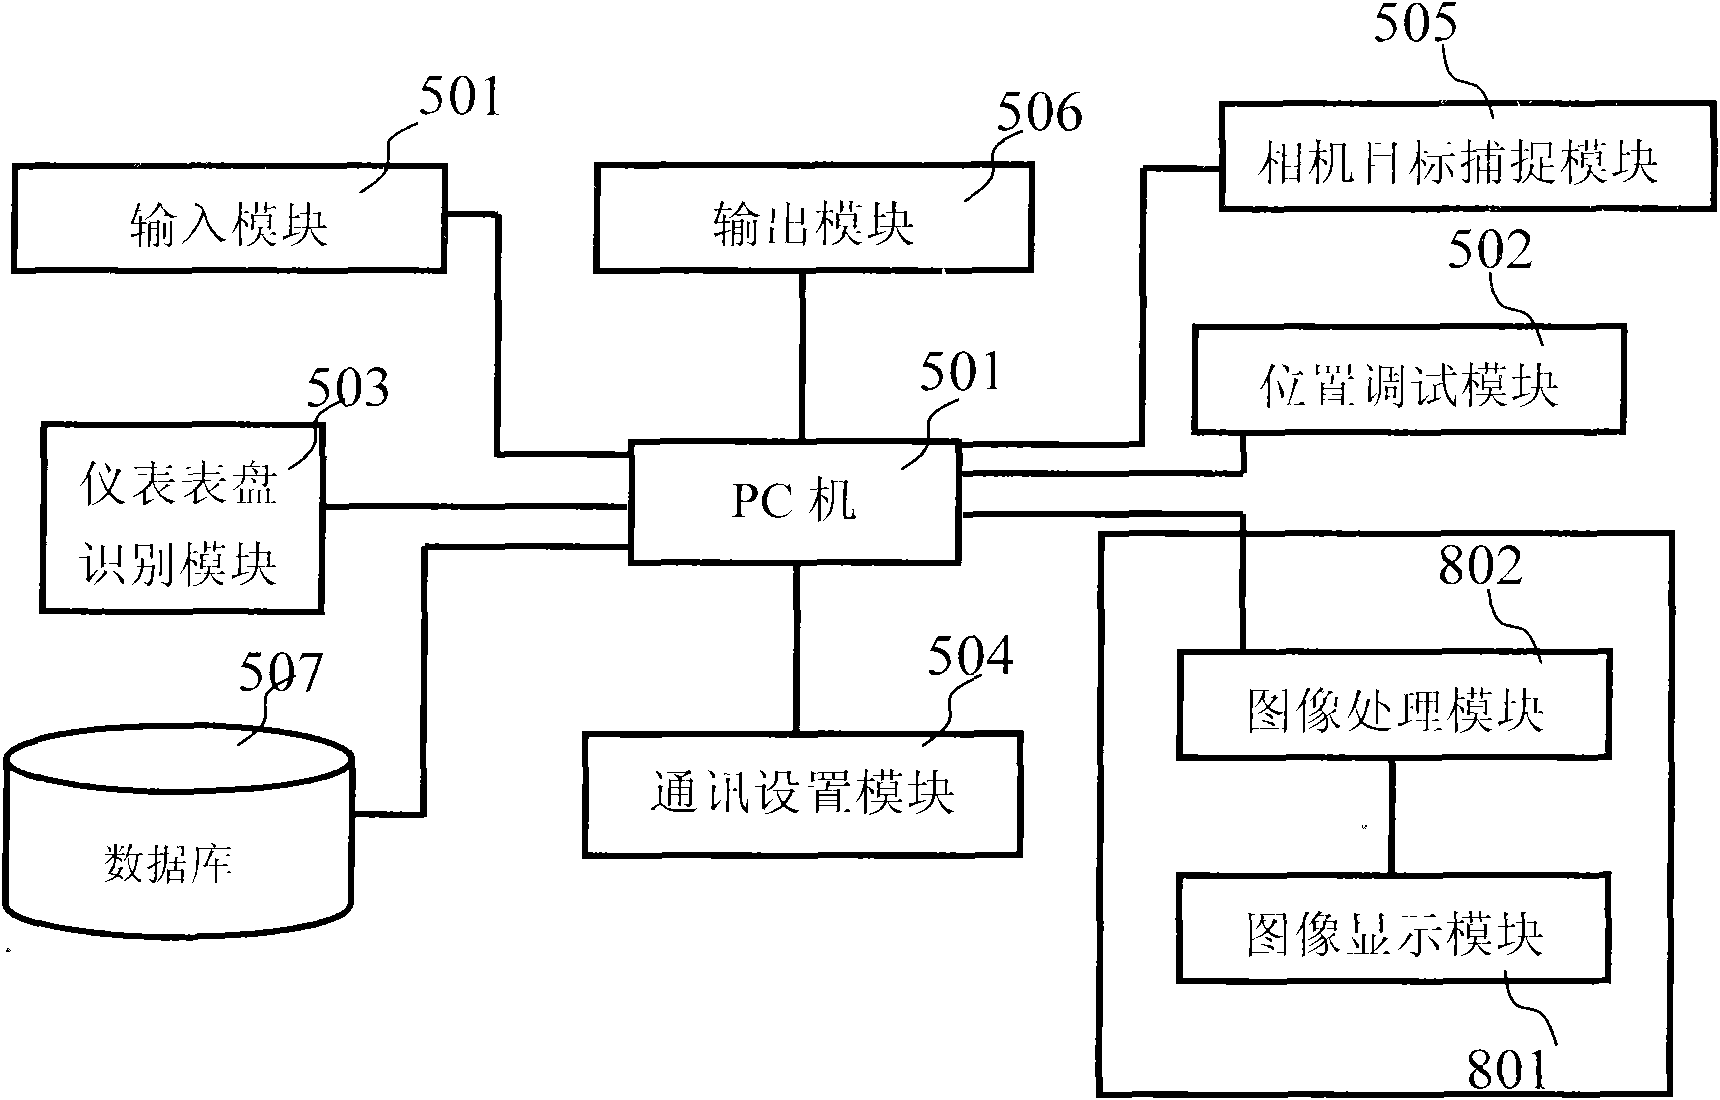 Auto meter visual detecting system based on computer and detecting method thereof